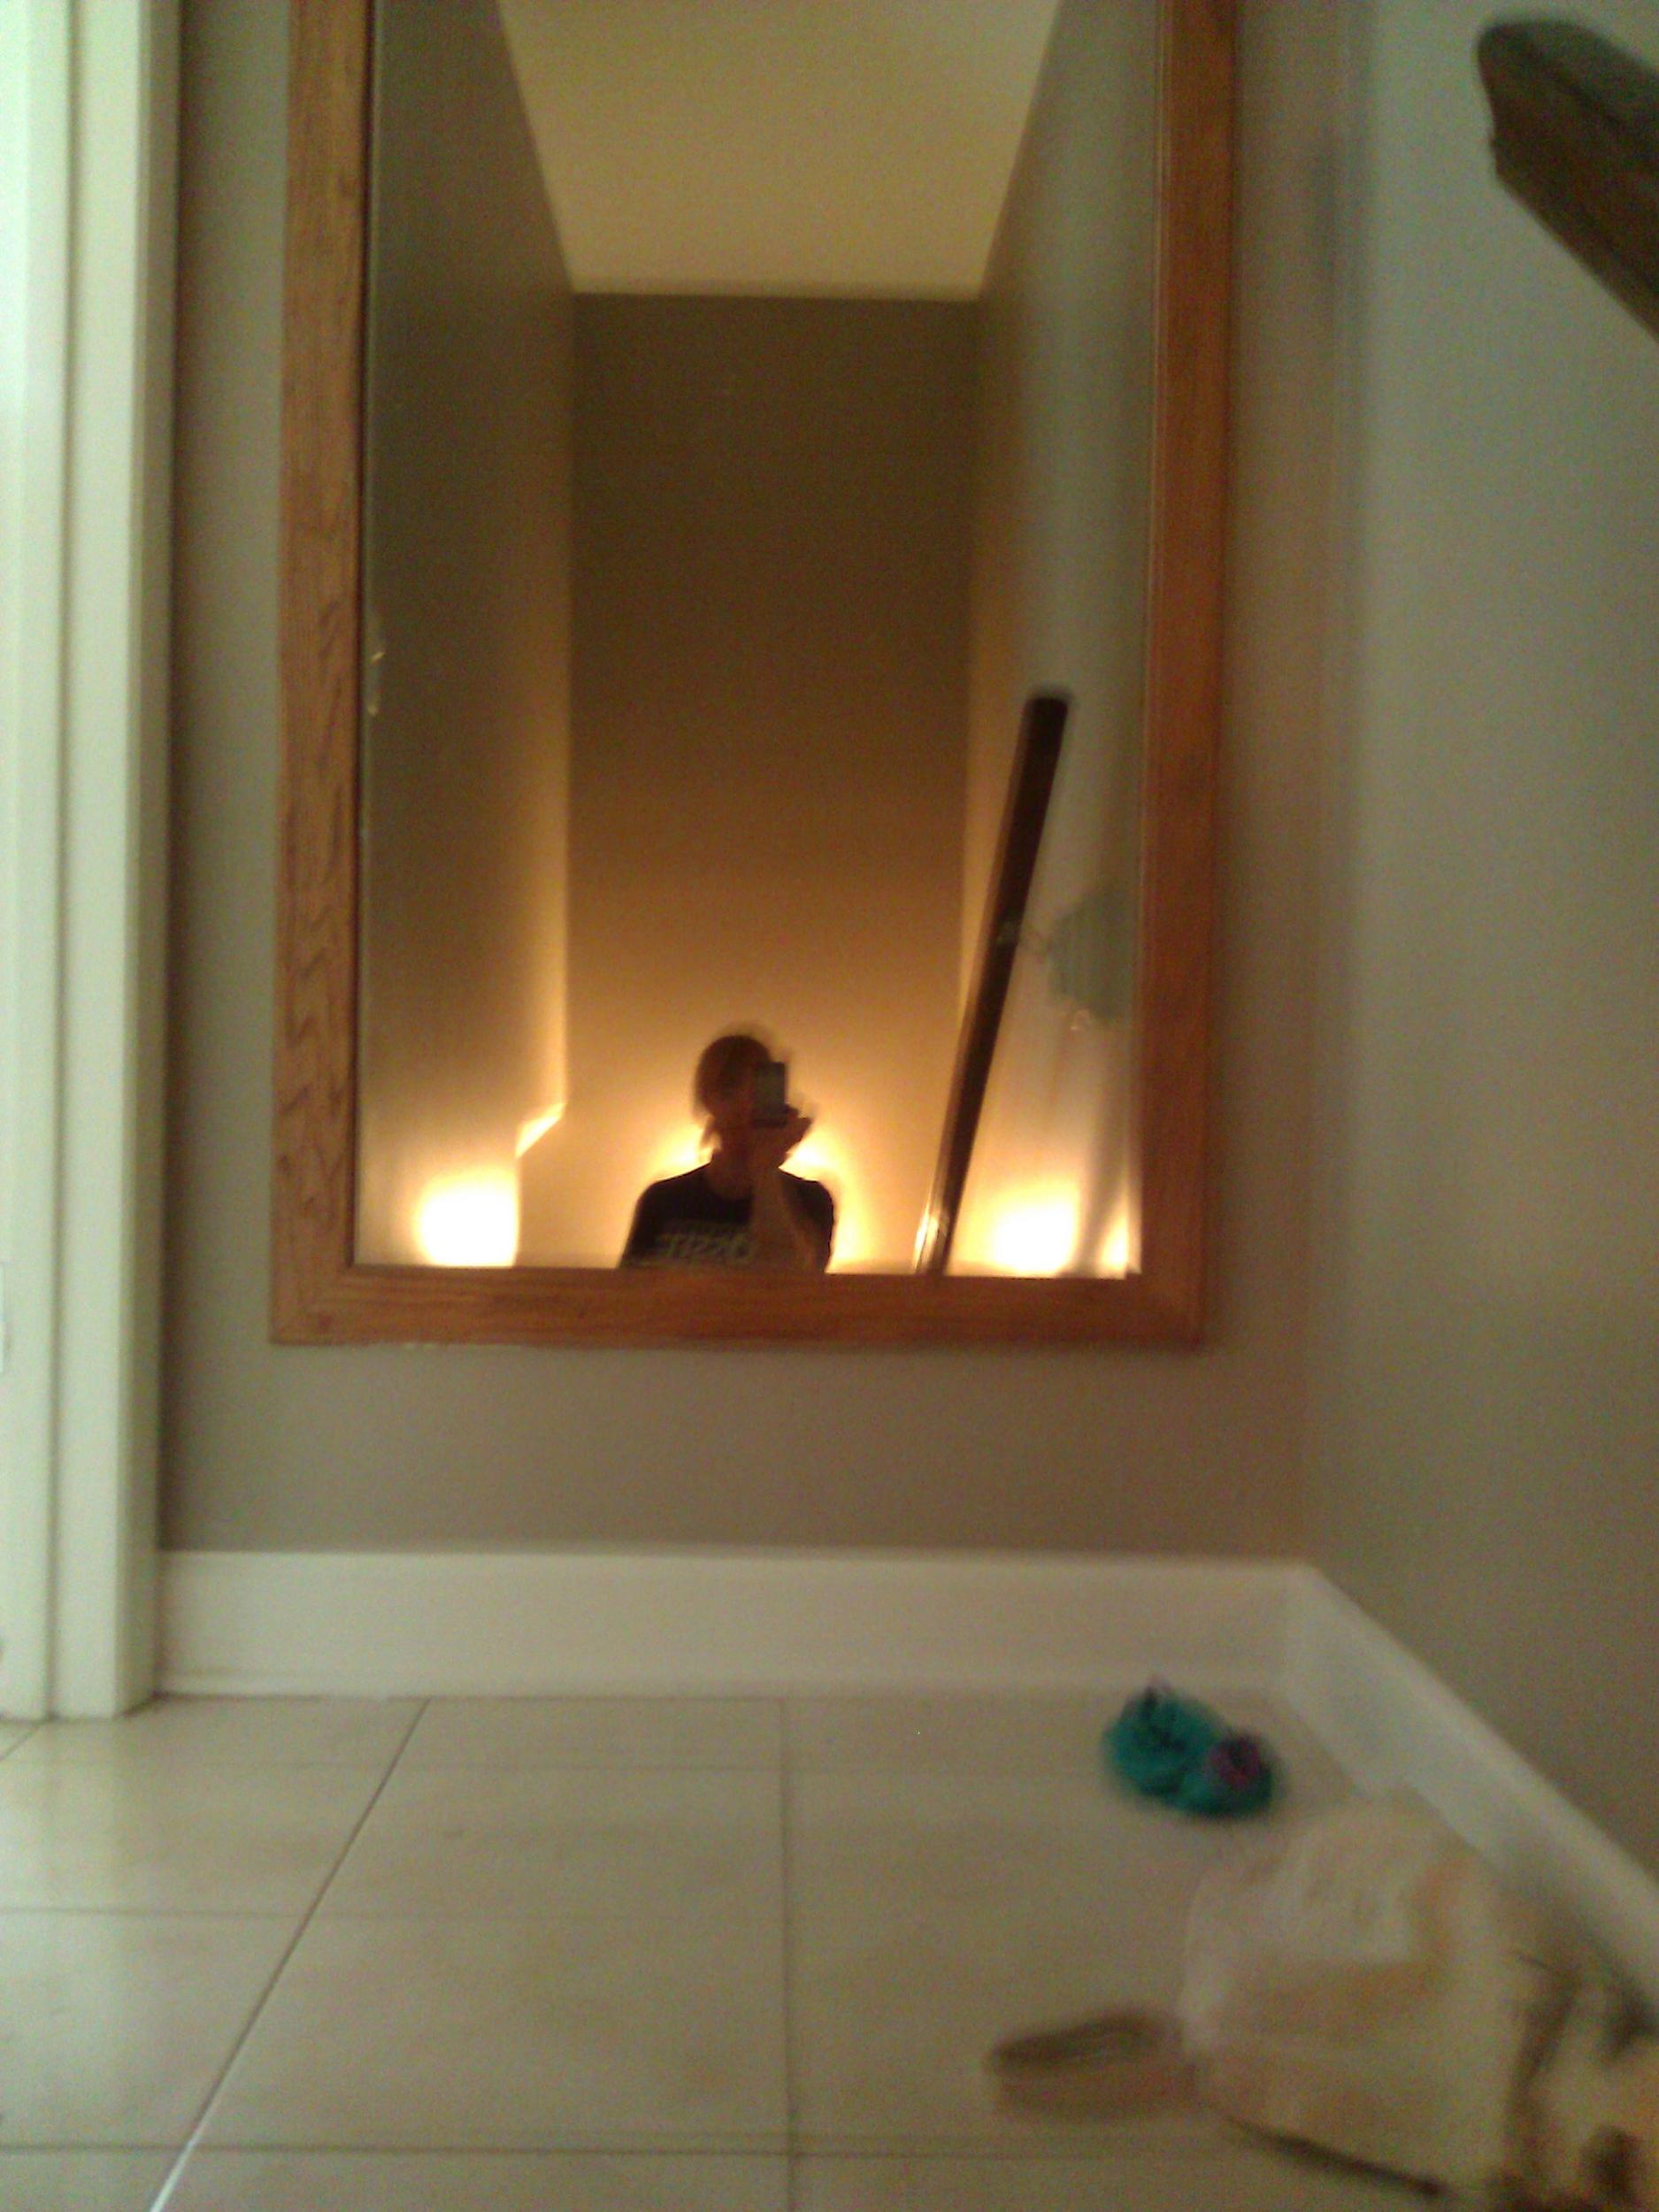 The shot that will scare the bedoody out of you when you are in the house alone at 5 a.m. and you forget there is a mirror at the top of the stairs.